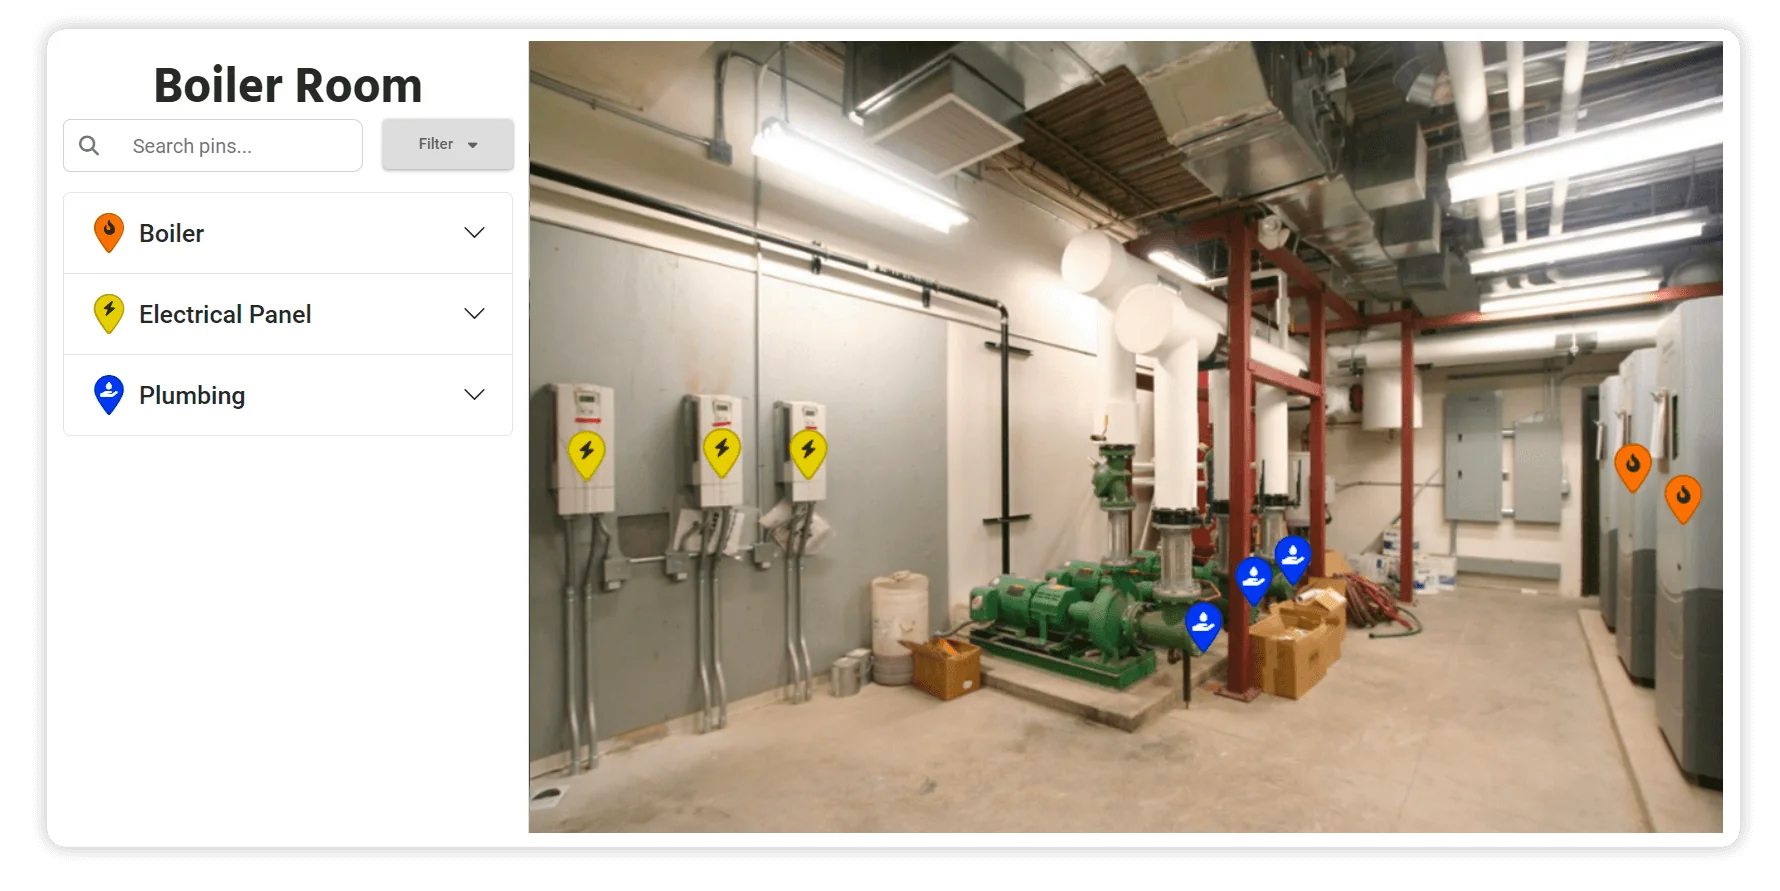 Interactive Mapping depicting a visual layout of a boiler room.